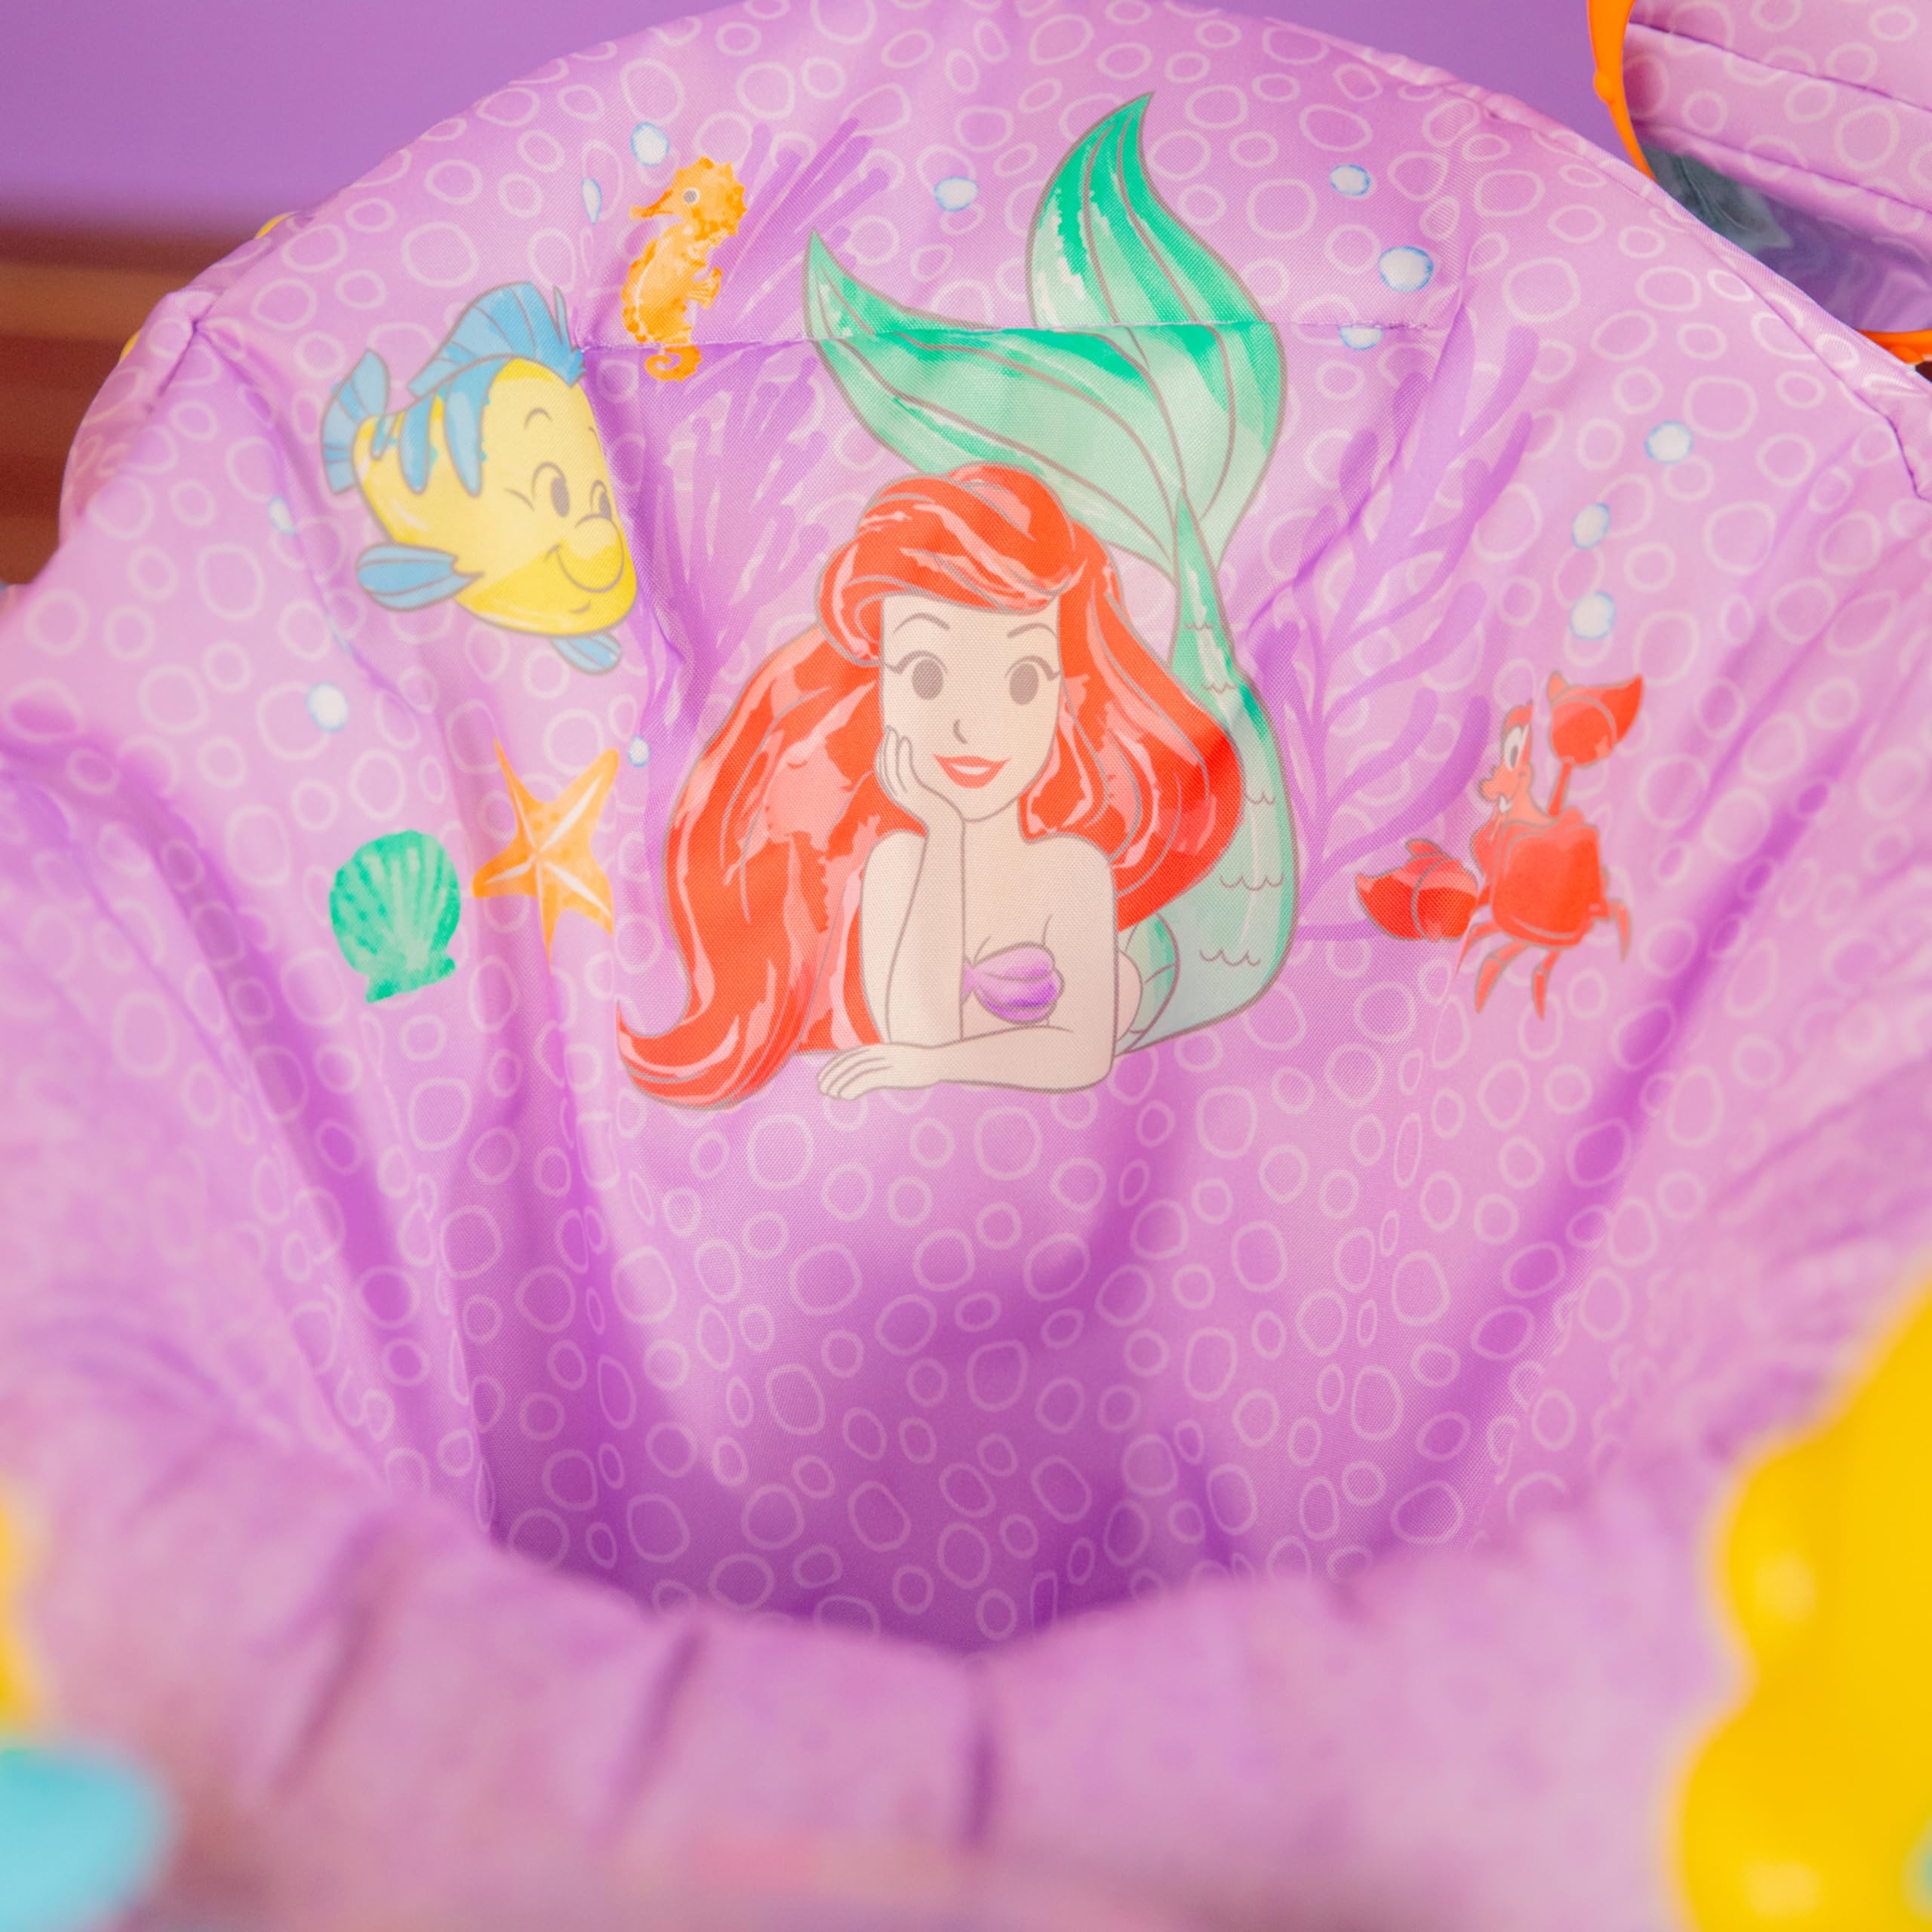 Bright Starts Disney The Little Mermaid Sea of Activities Baby Activity Jumper with Interactive Toys, Lights & Music with Disney Princess Ariel, 6-12 Months (Blue)